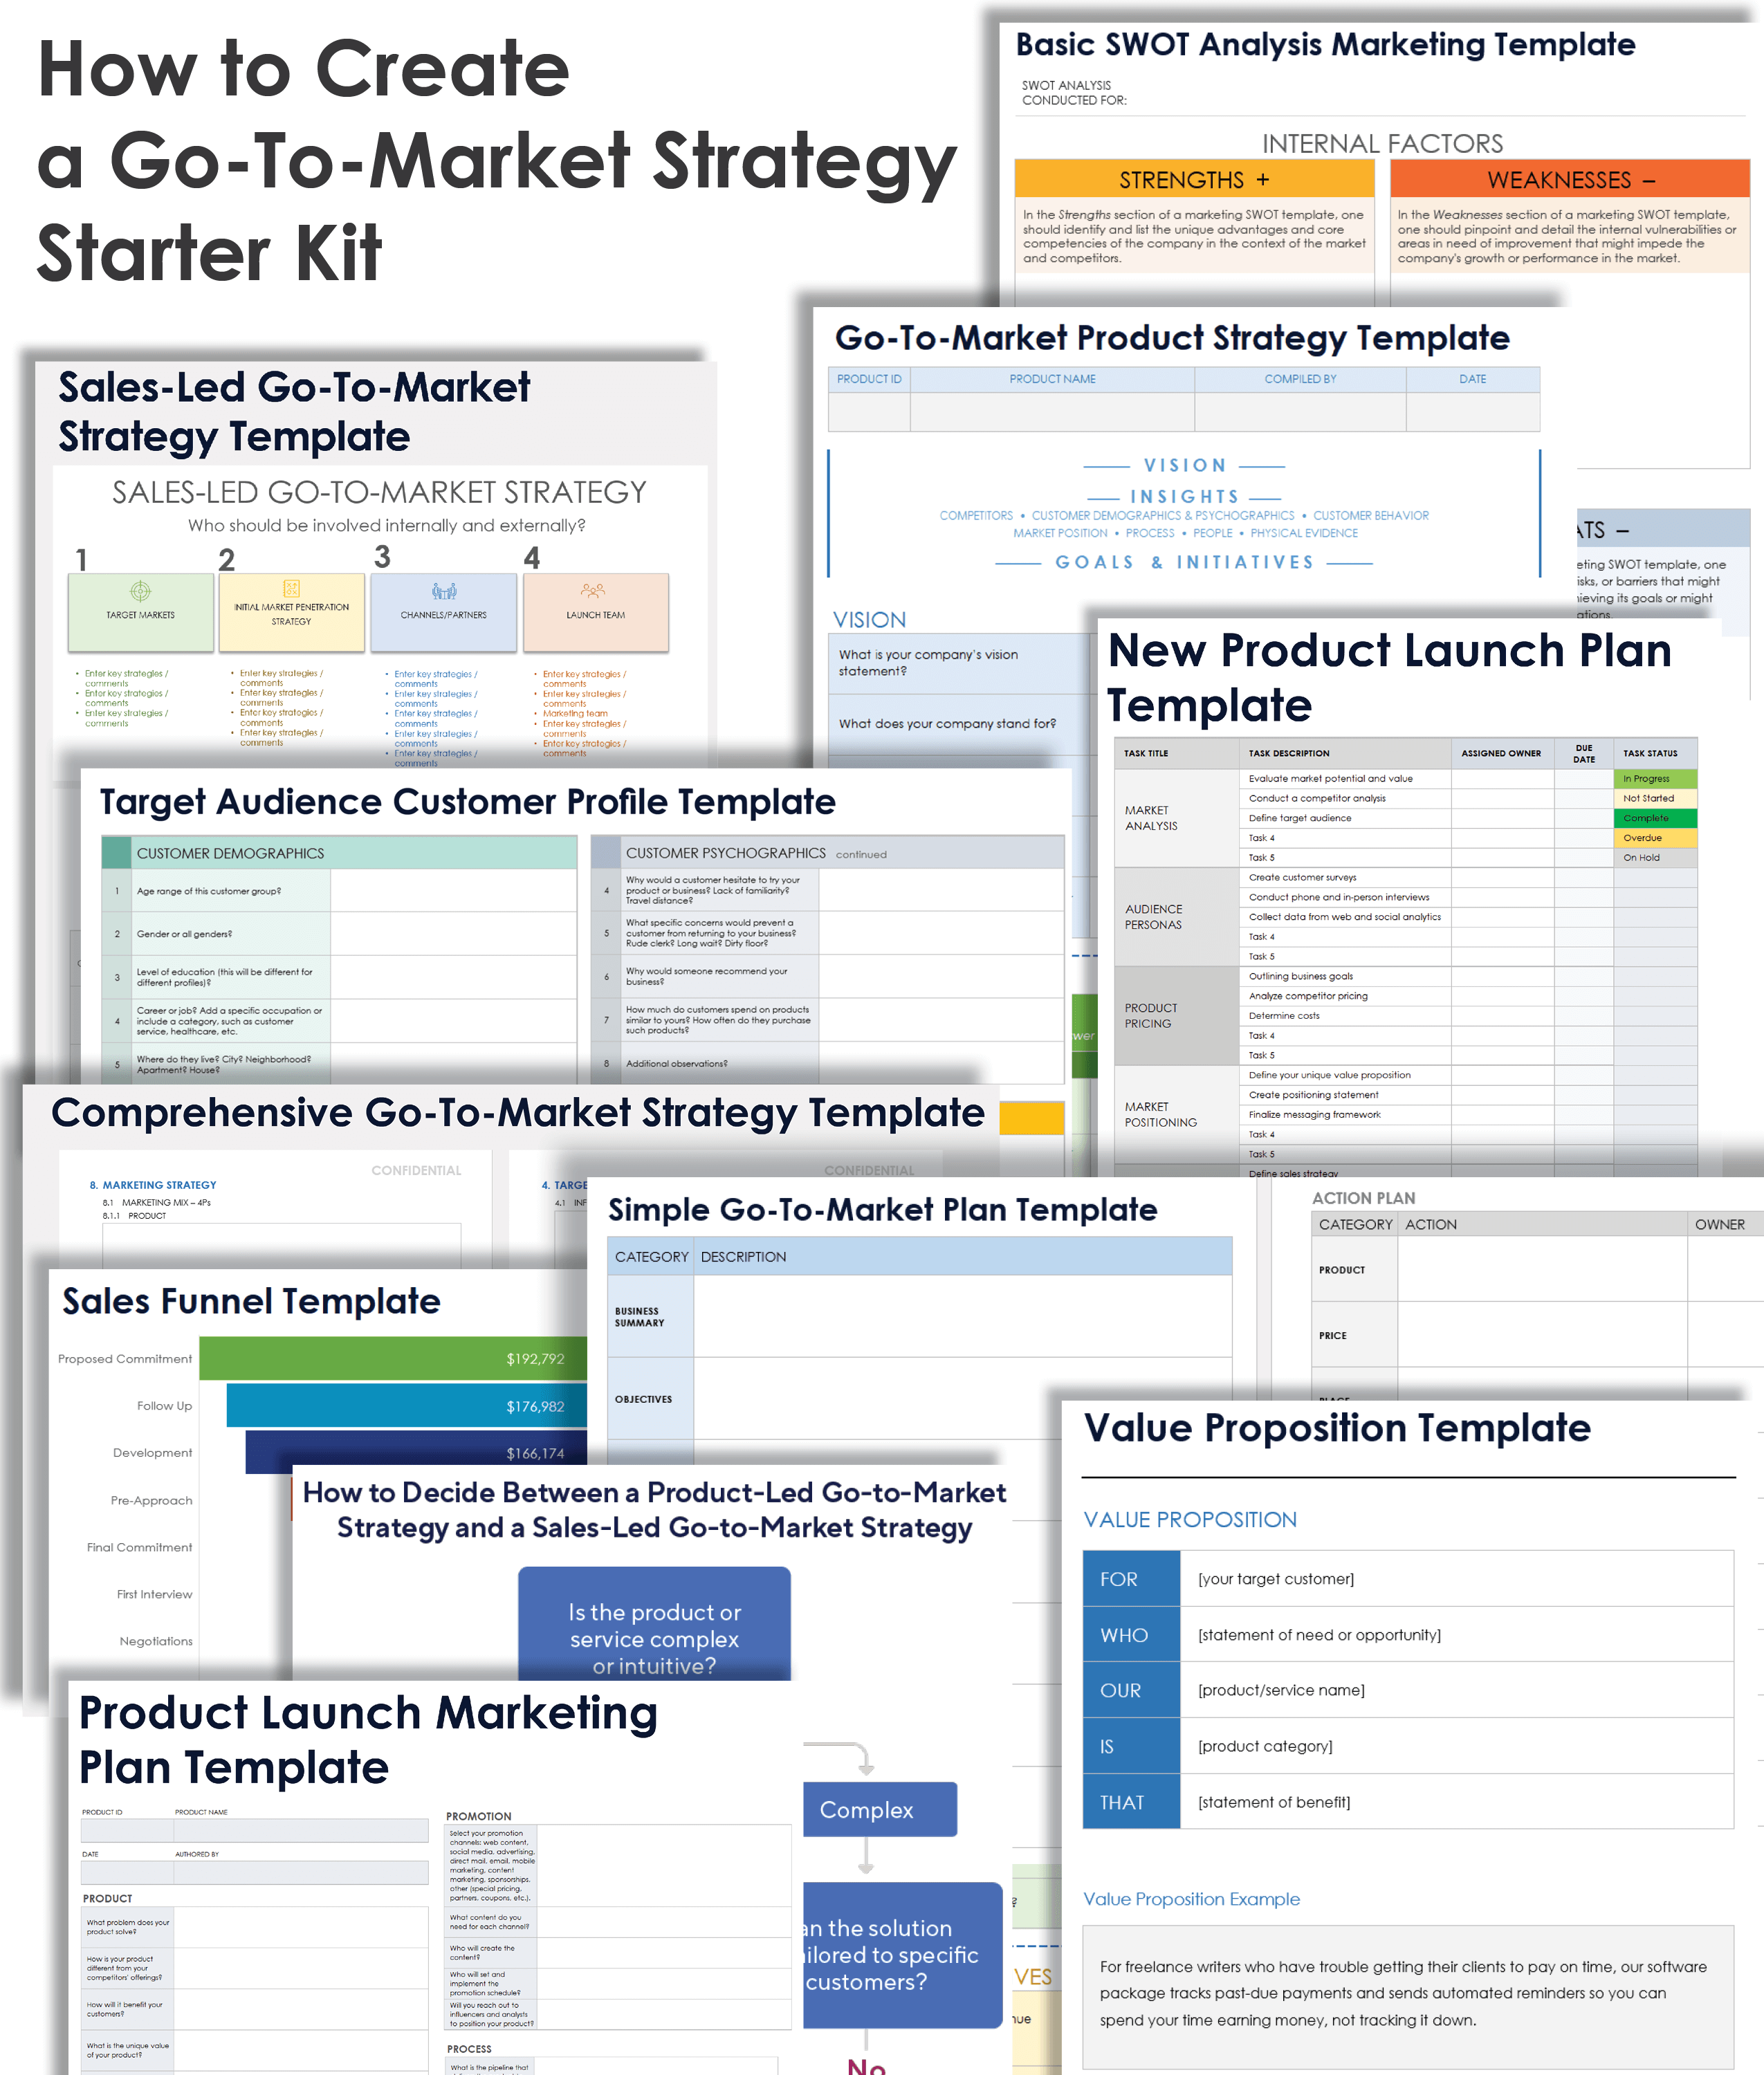 How to Create a Go To Market Strategy Starter Kit